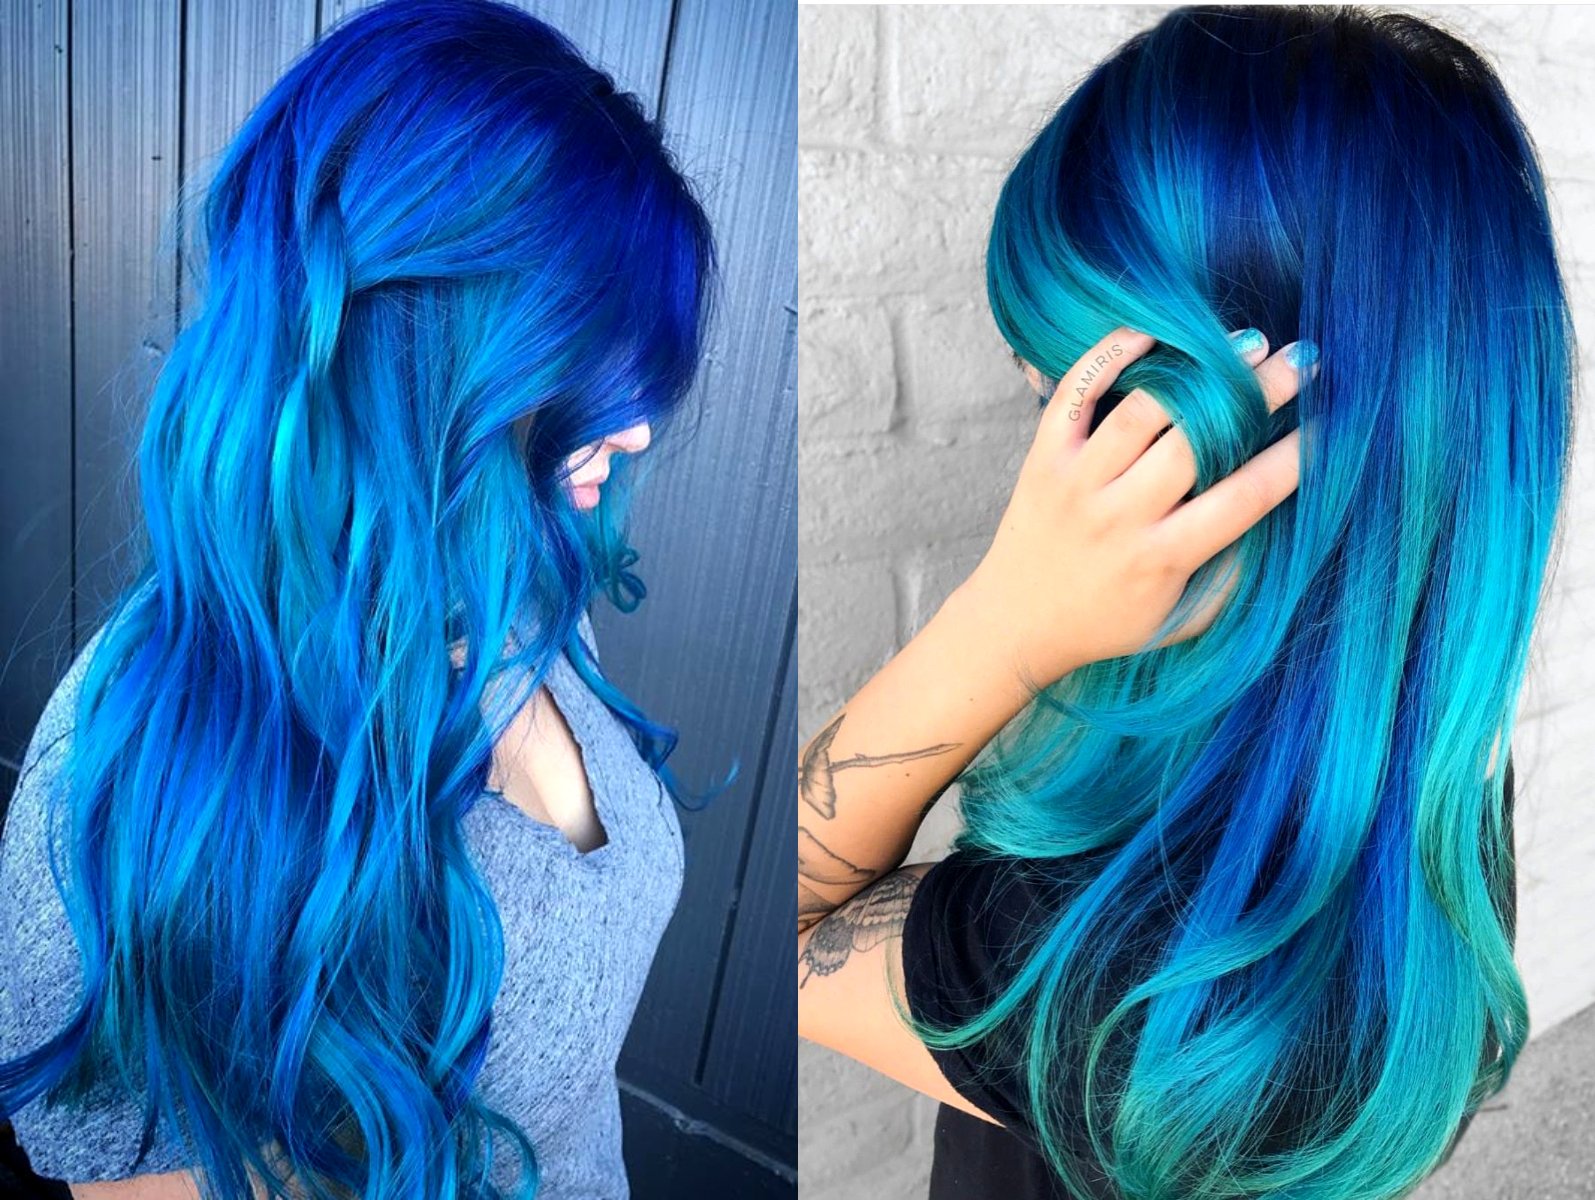 Blue balayage hair for women - wide 1